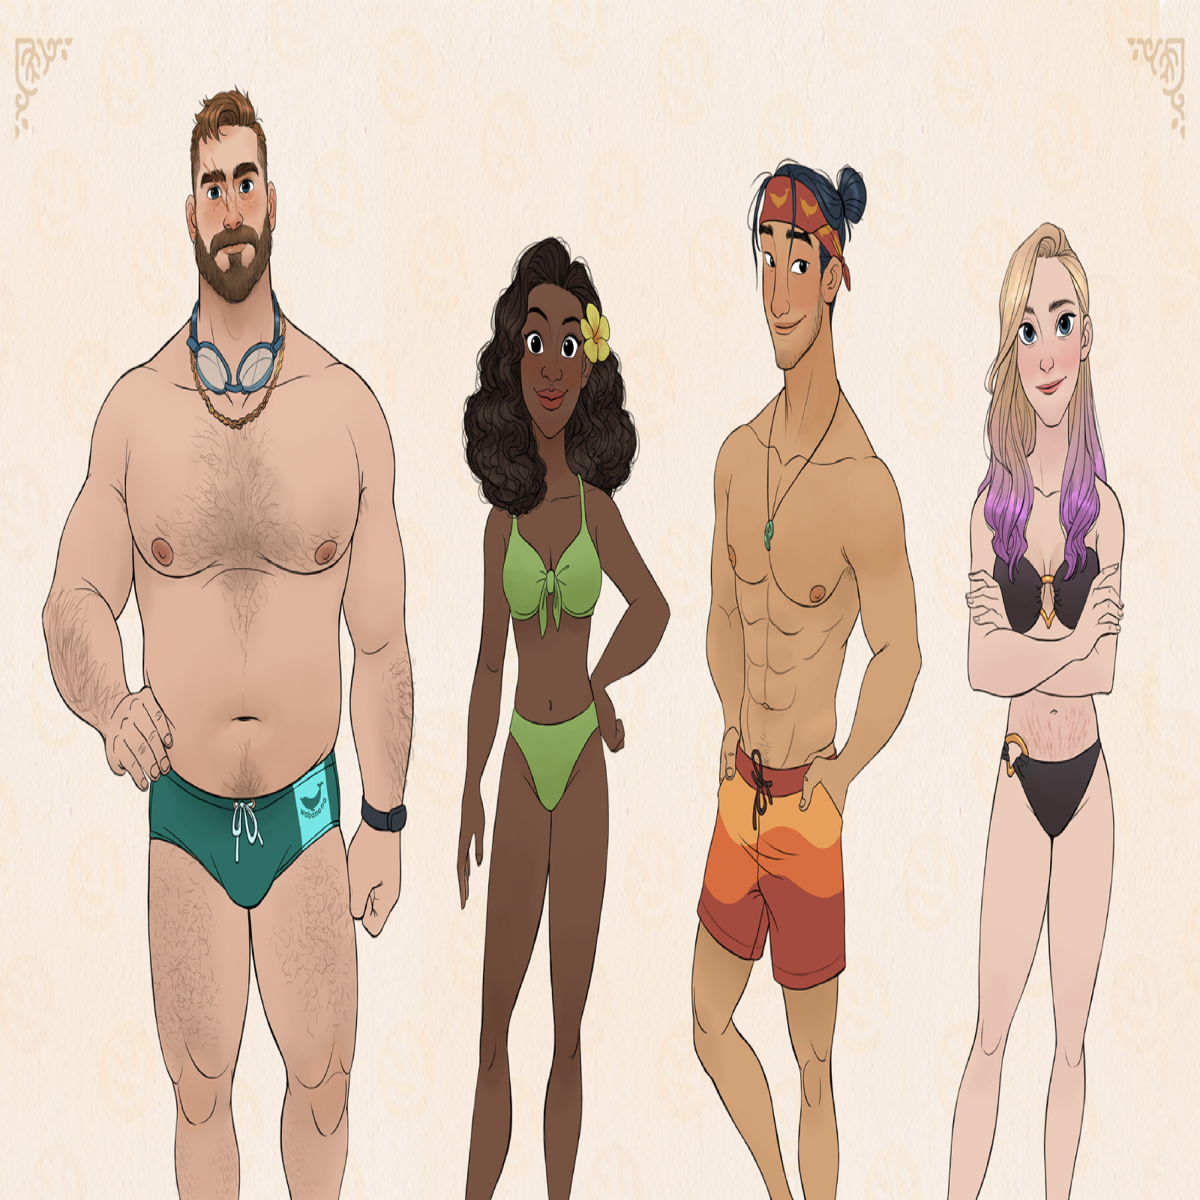 https://assetsio.gnwcdn.com/coral-island-bathing-suits.png?width=1200&height=1200&fit=crop&quality=100&format=png&enable=upscale&auto=webp